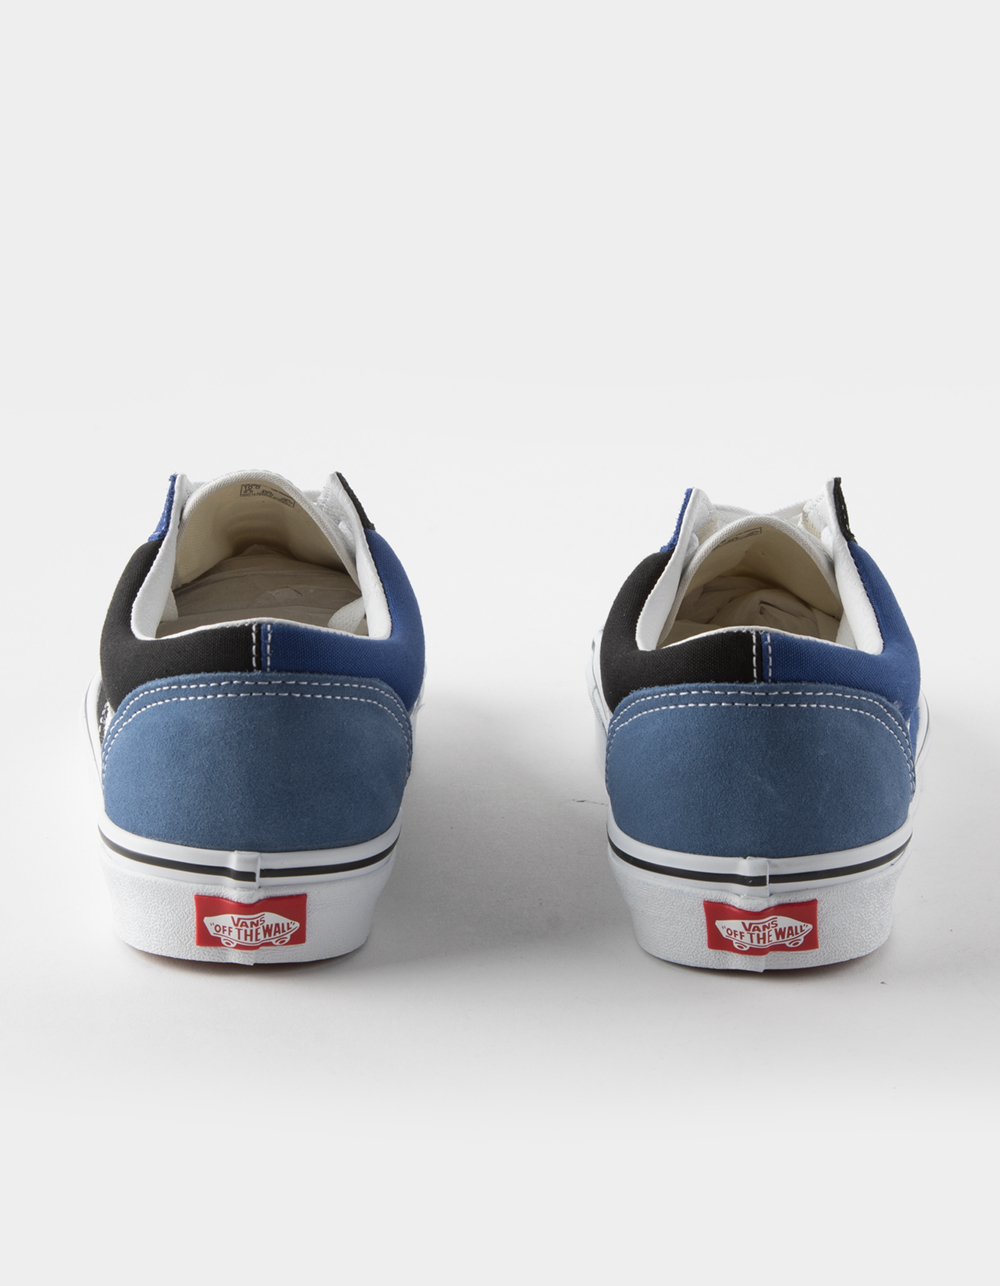 VANS Style 36 Shoes - NAVY COMBO | Tillys